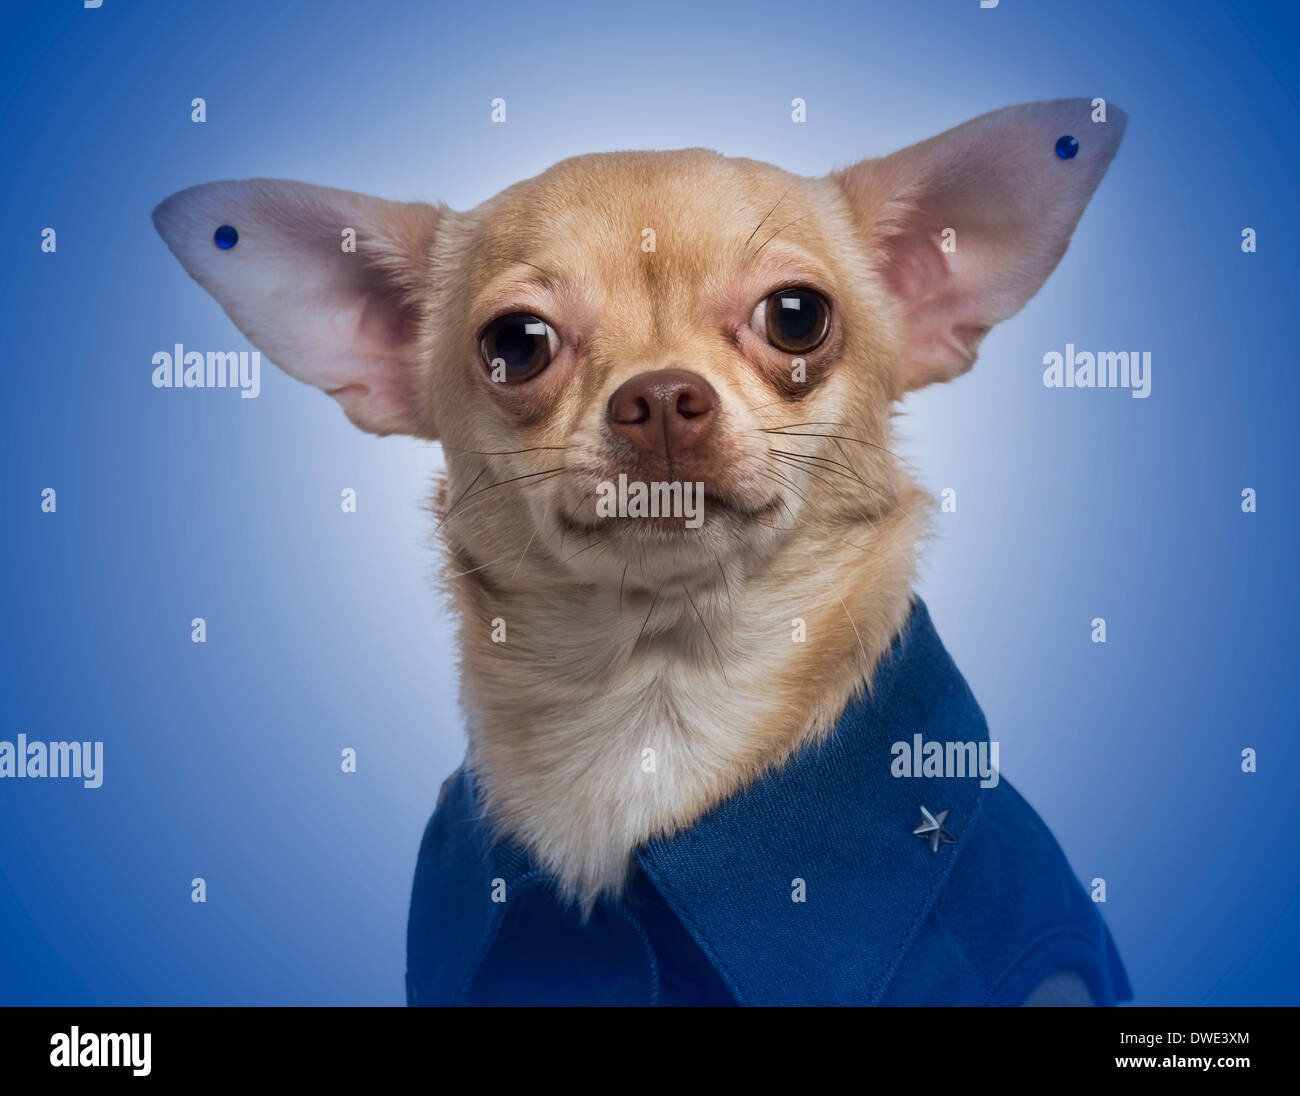 Dressed-up Chihuahua with earrings on a blue gradient background Stock Photo